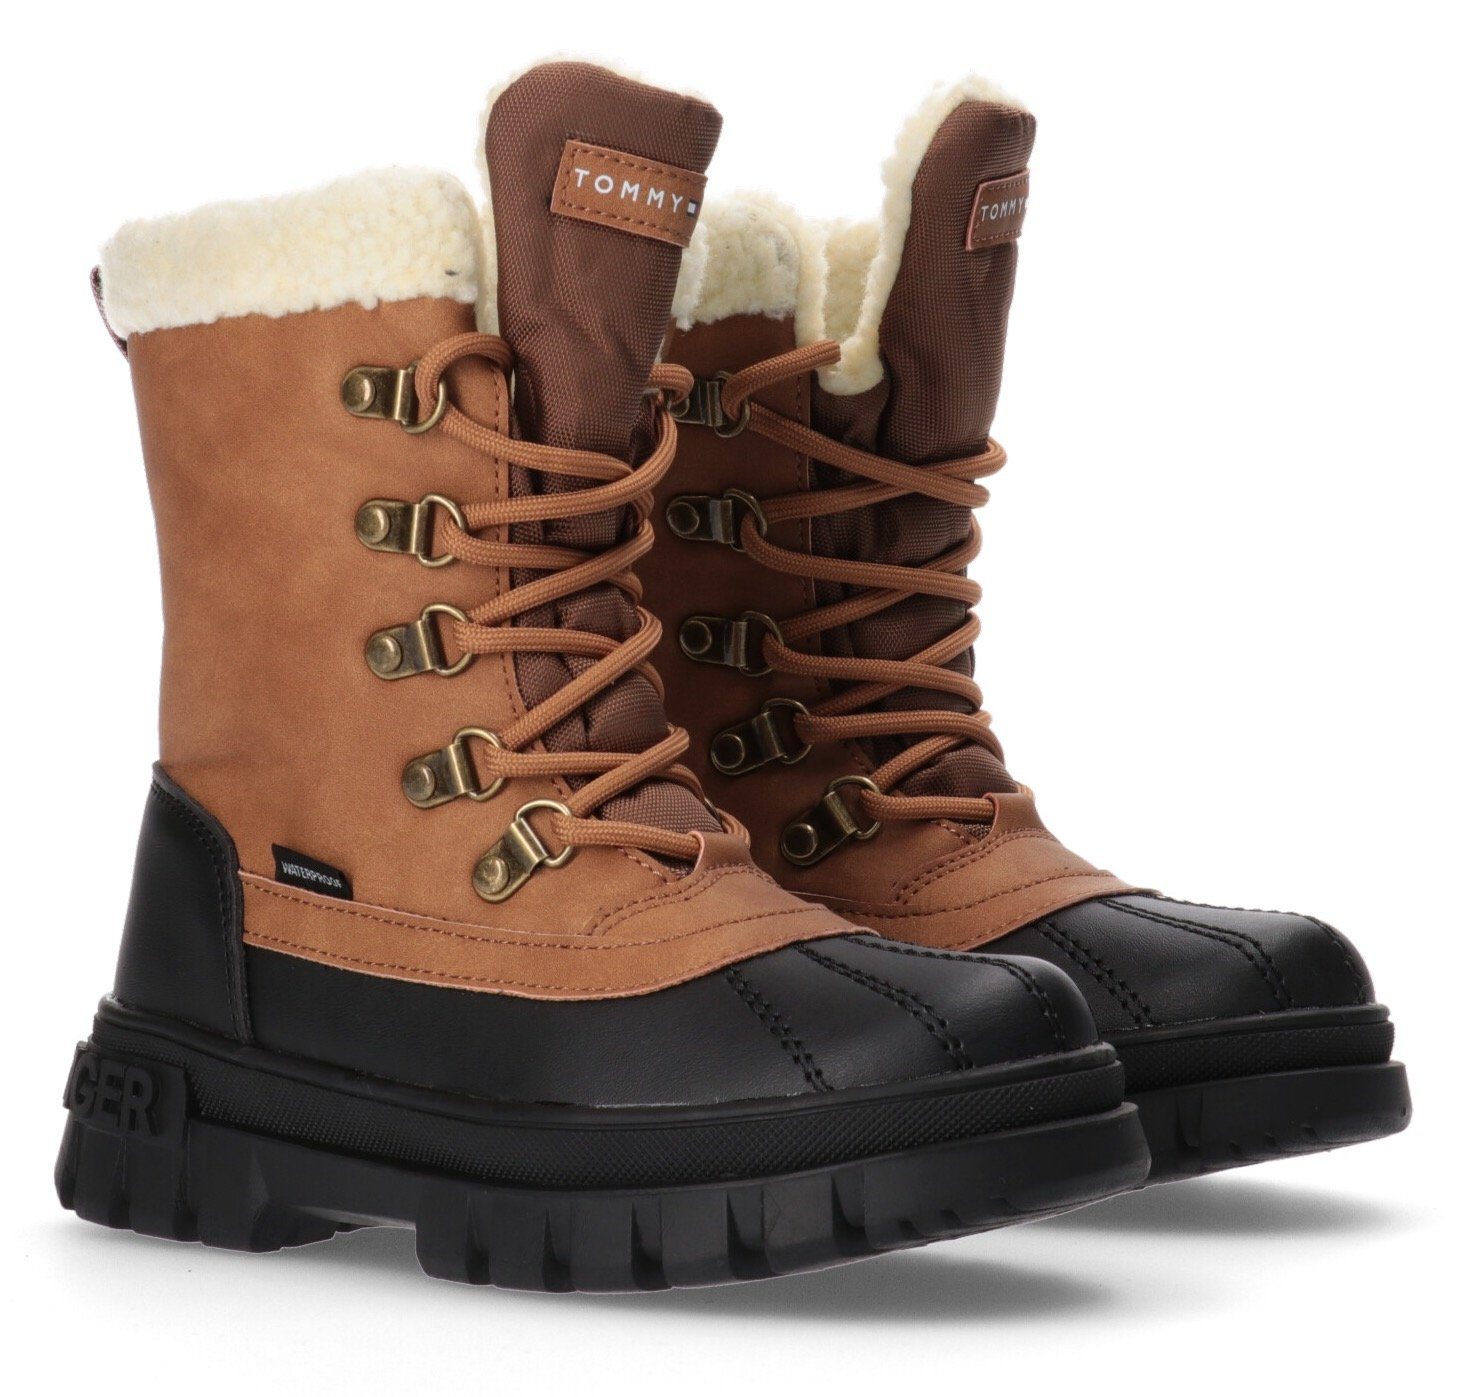 Tommy Hilfiger Thermostiefel LACE-UP BOOT Snowboots mit Warmfutter | Snowboots